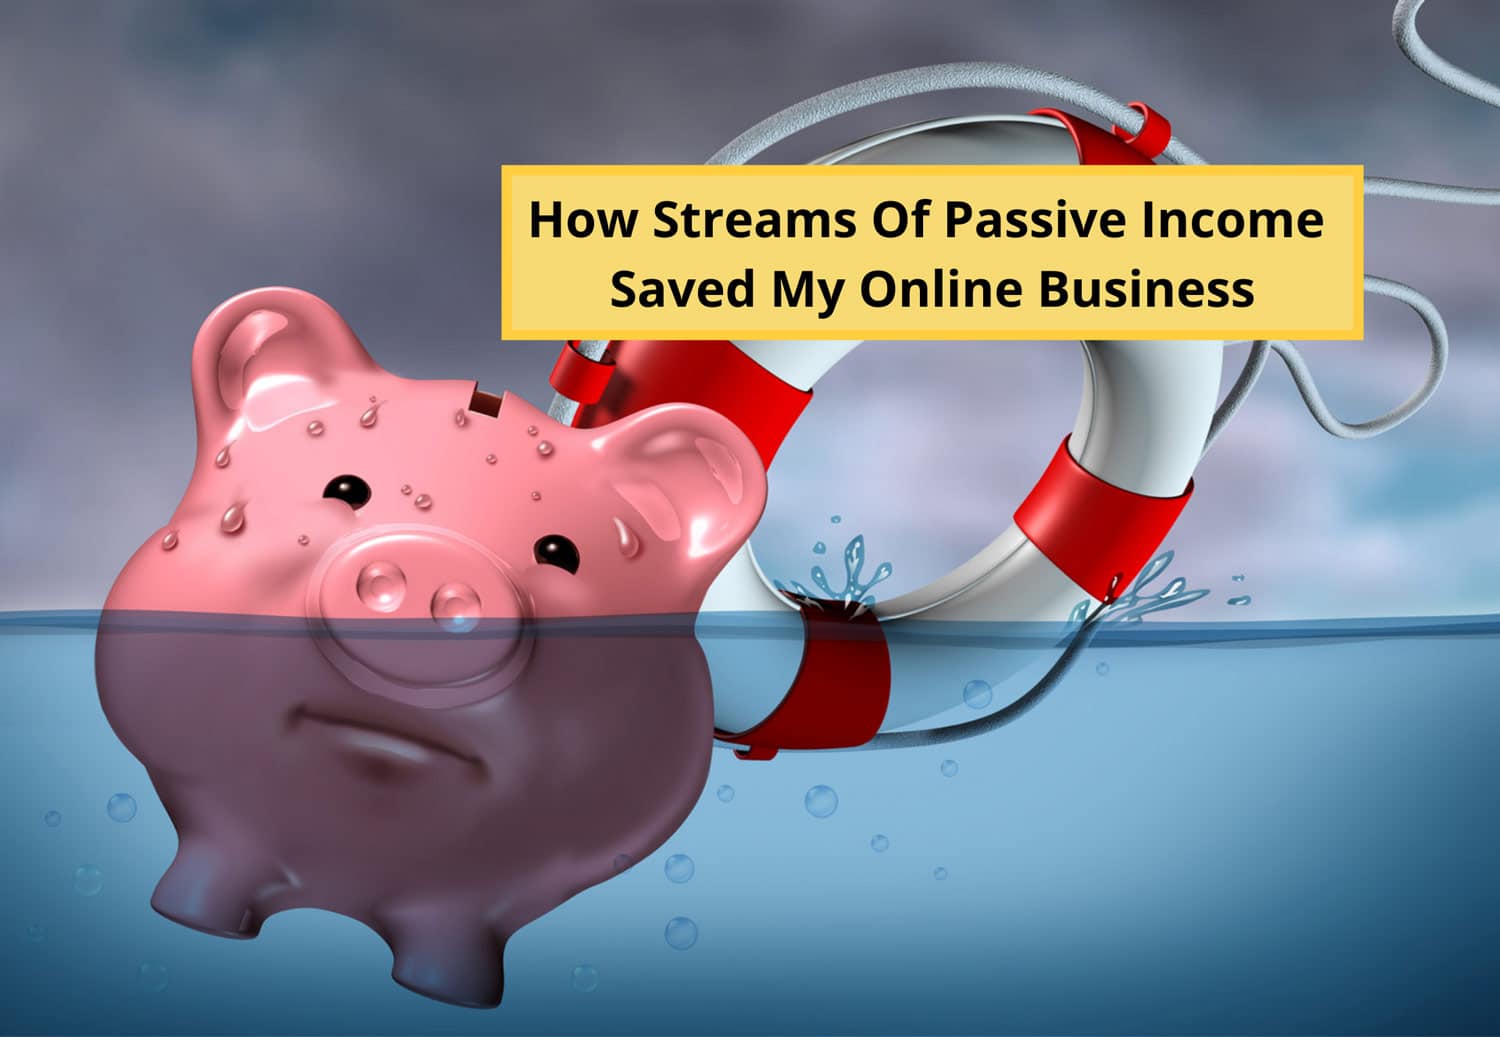 How Streams Of Passive Income Saved My Online Business - Marketing